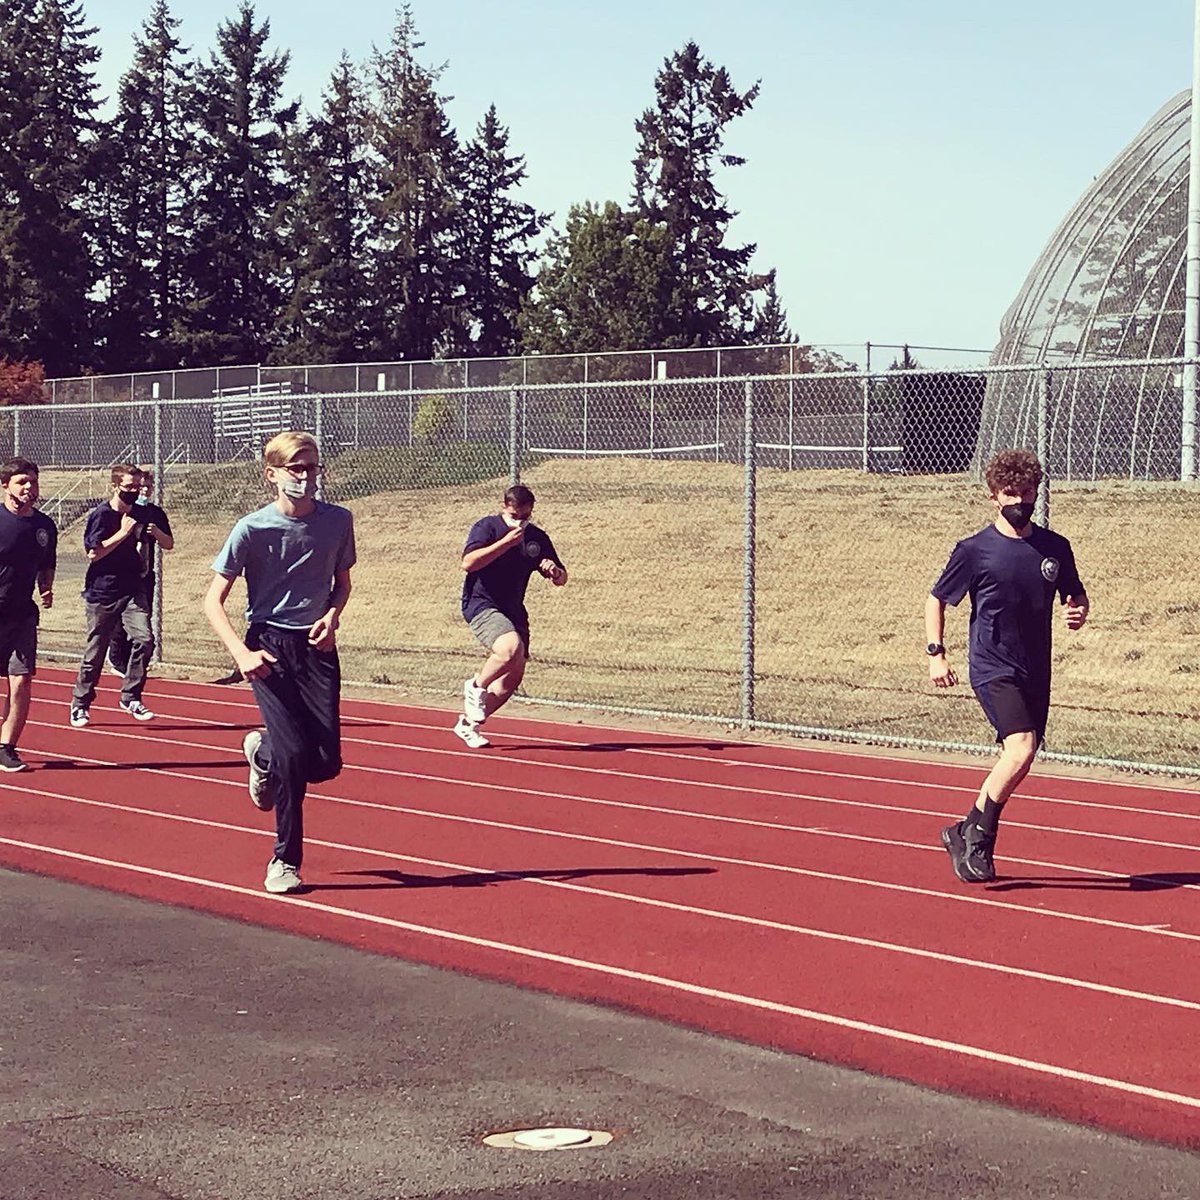 Another great #NavyPT session with the #JROTC at #peninsulahighschool. Met some amazing kids and the effort was awesome! #gigharborhighschool #AmericasNavy #ForgedByTheSea #ntagpnw #nrsportorchard #fitness #ntagpnw